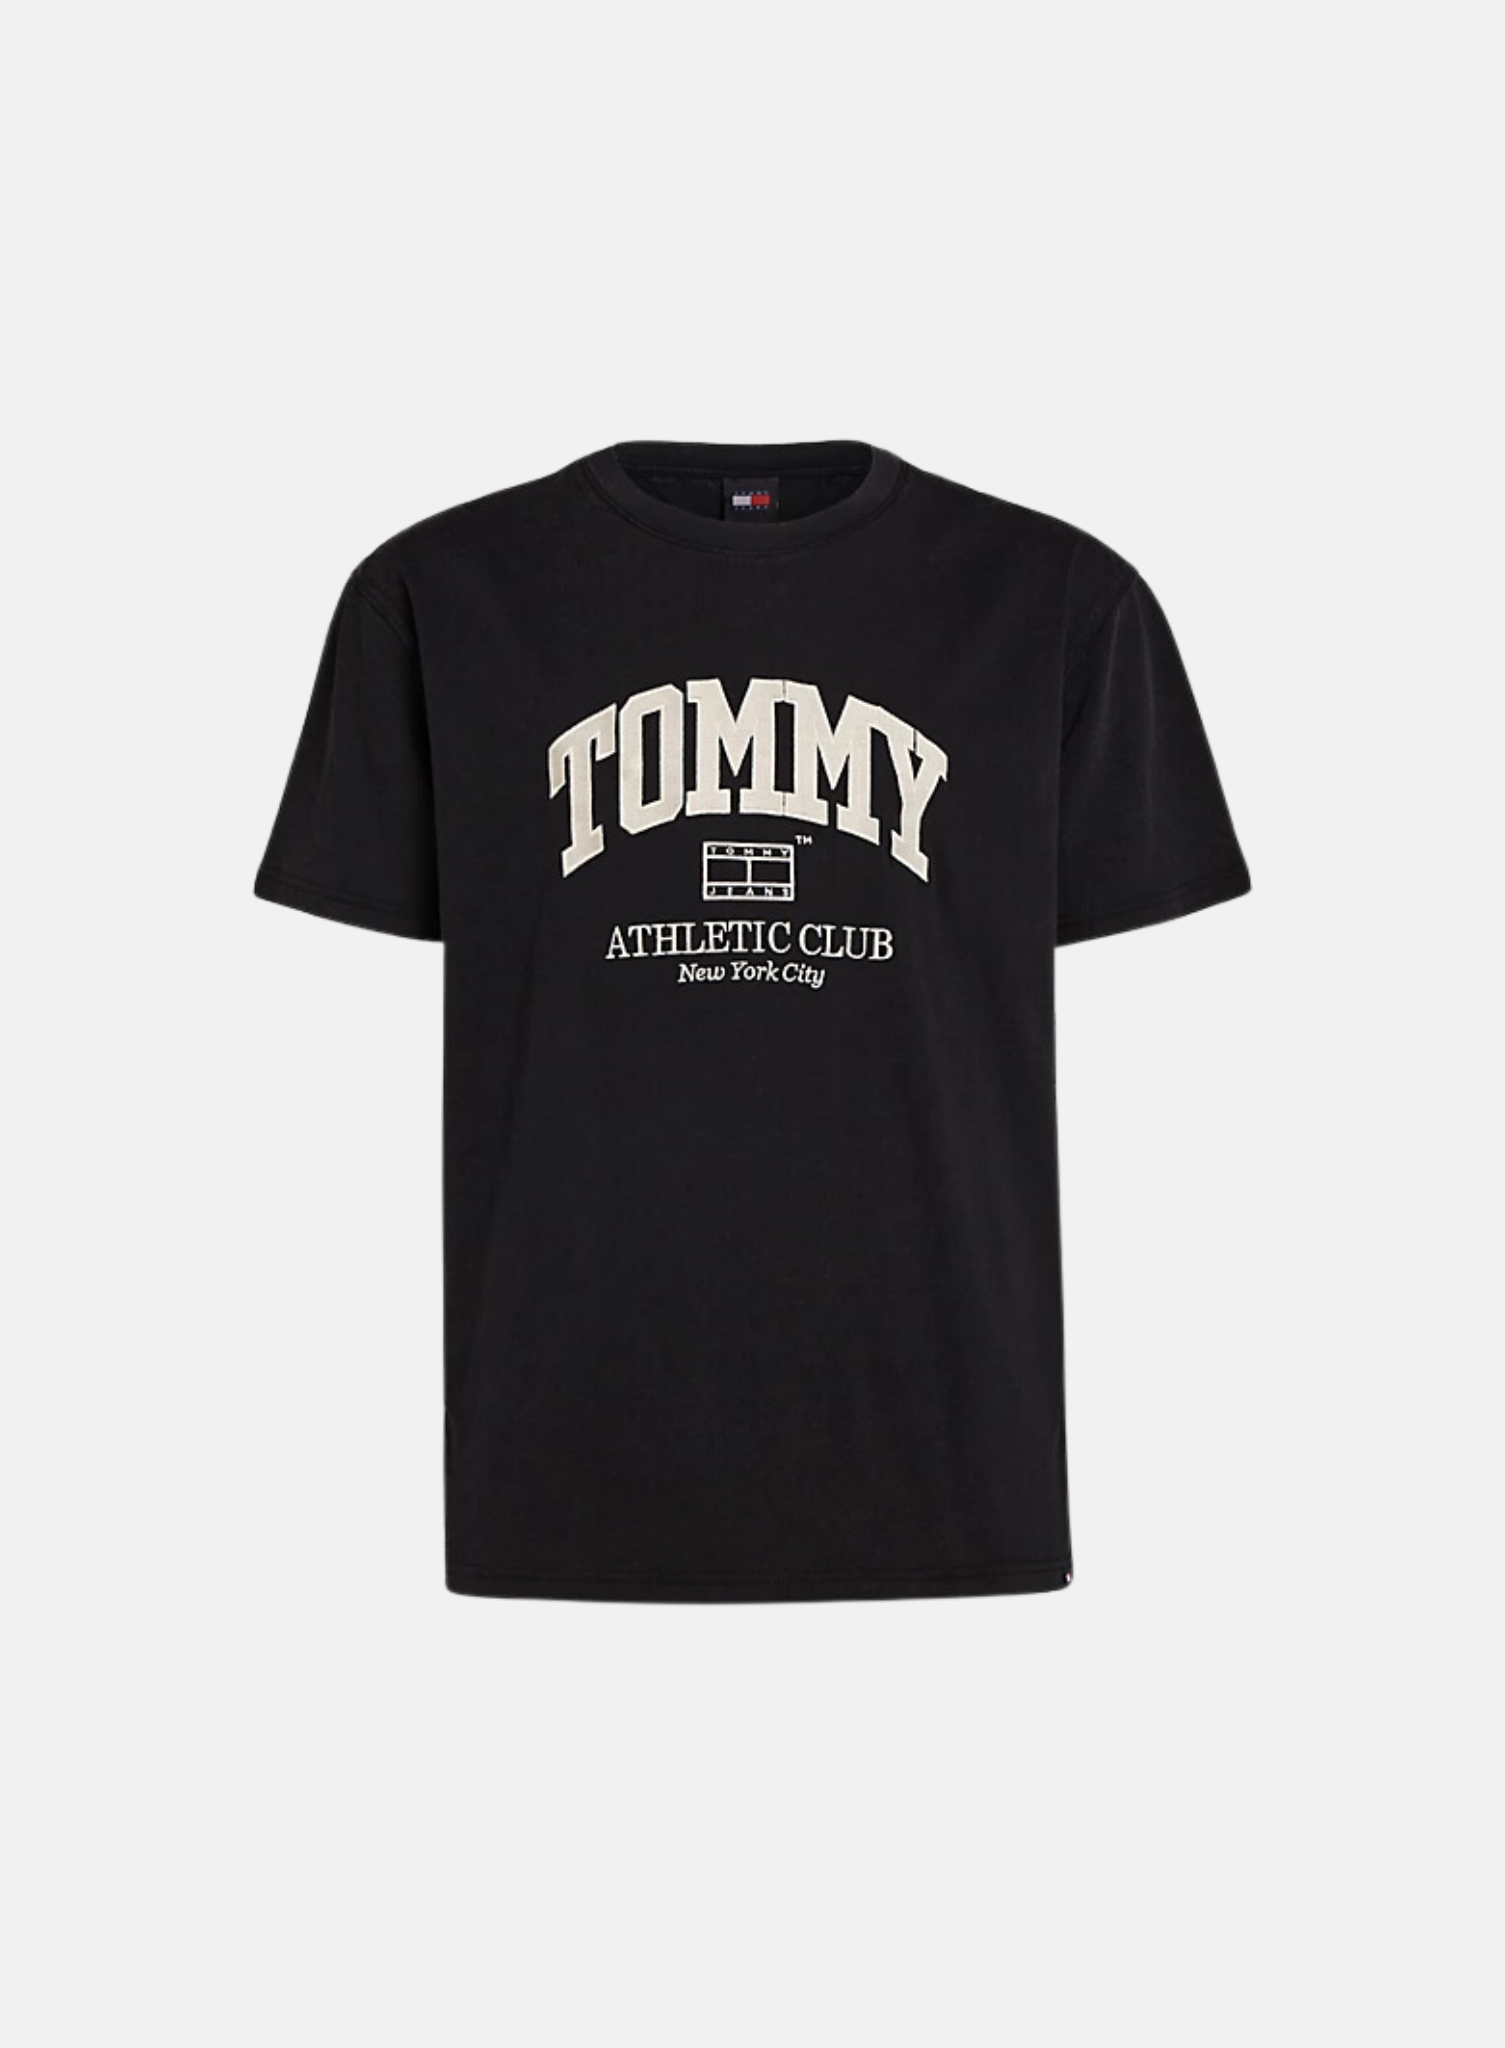 Tommy Jeans TJM Regular Atheletic Club Tee Black - Hympala Store 